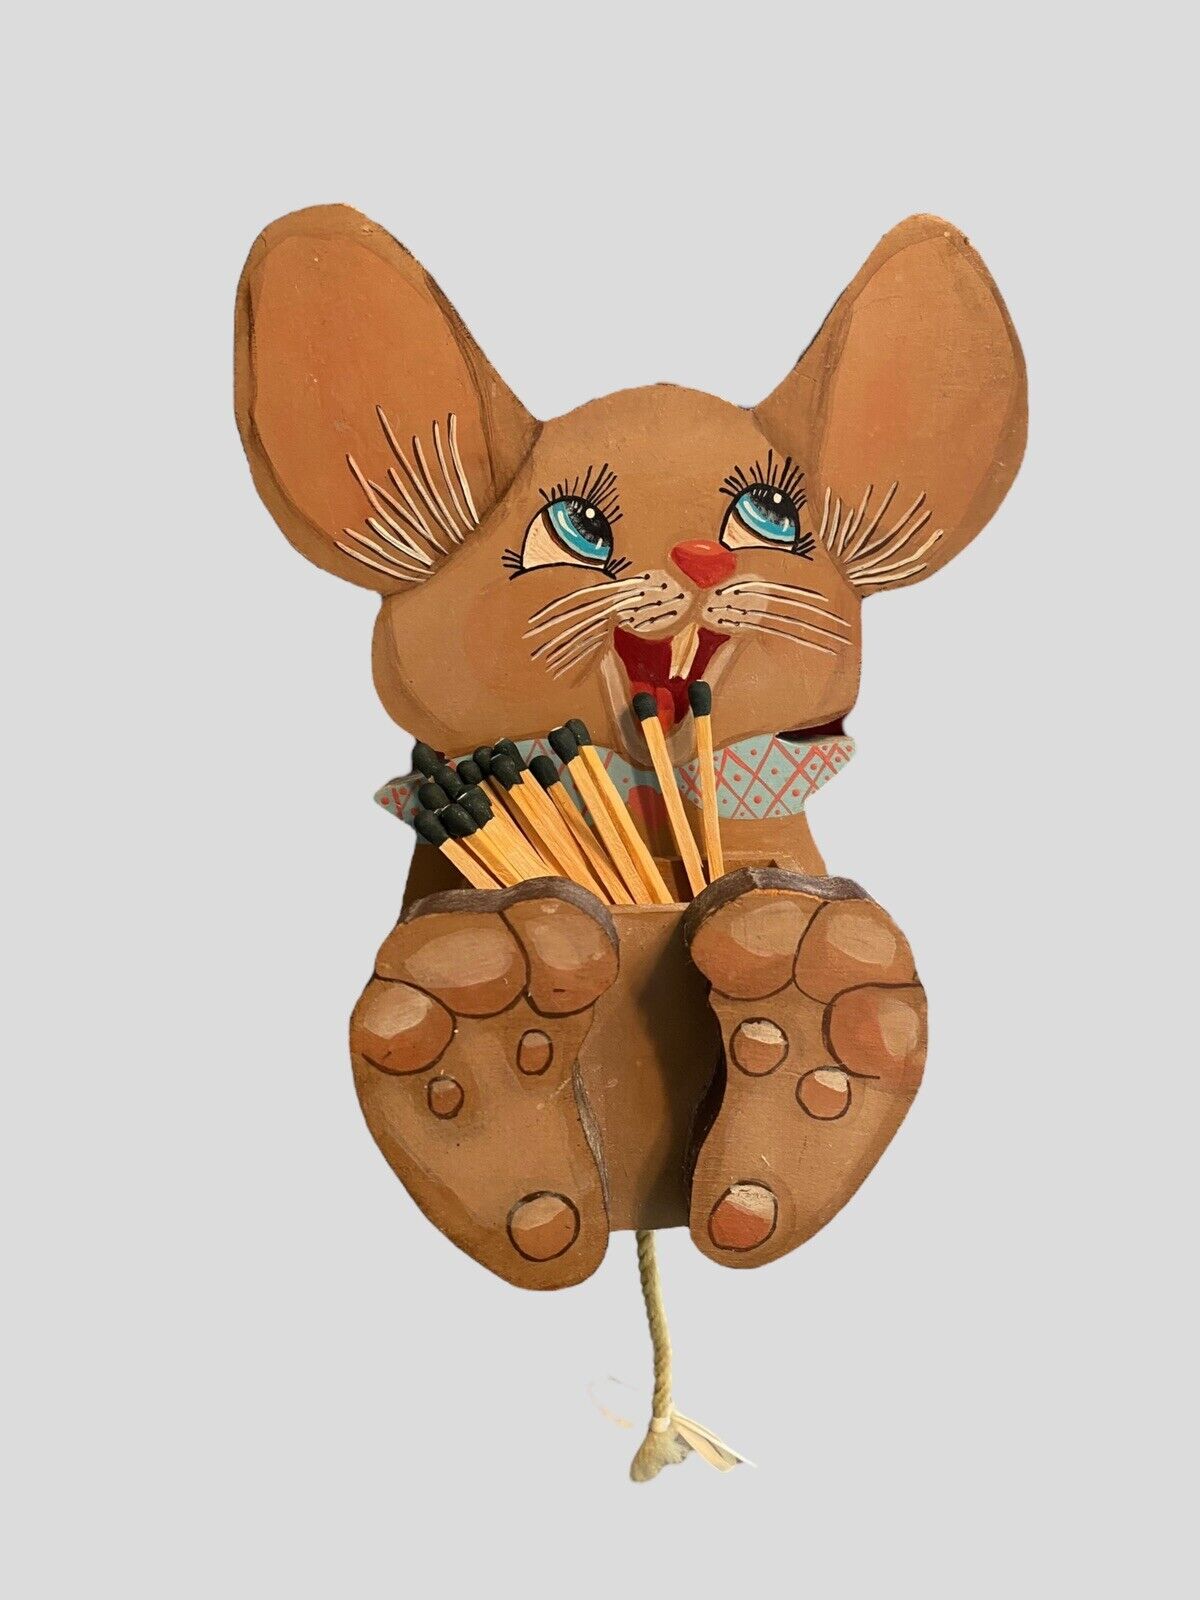 Vintage Wood Anthropomorphic Mouse Match Holder Wall Hanging Kitchen